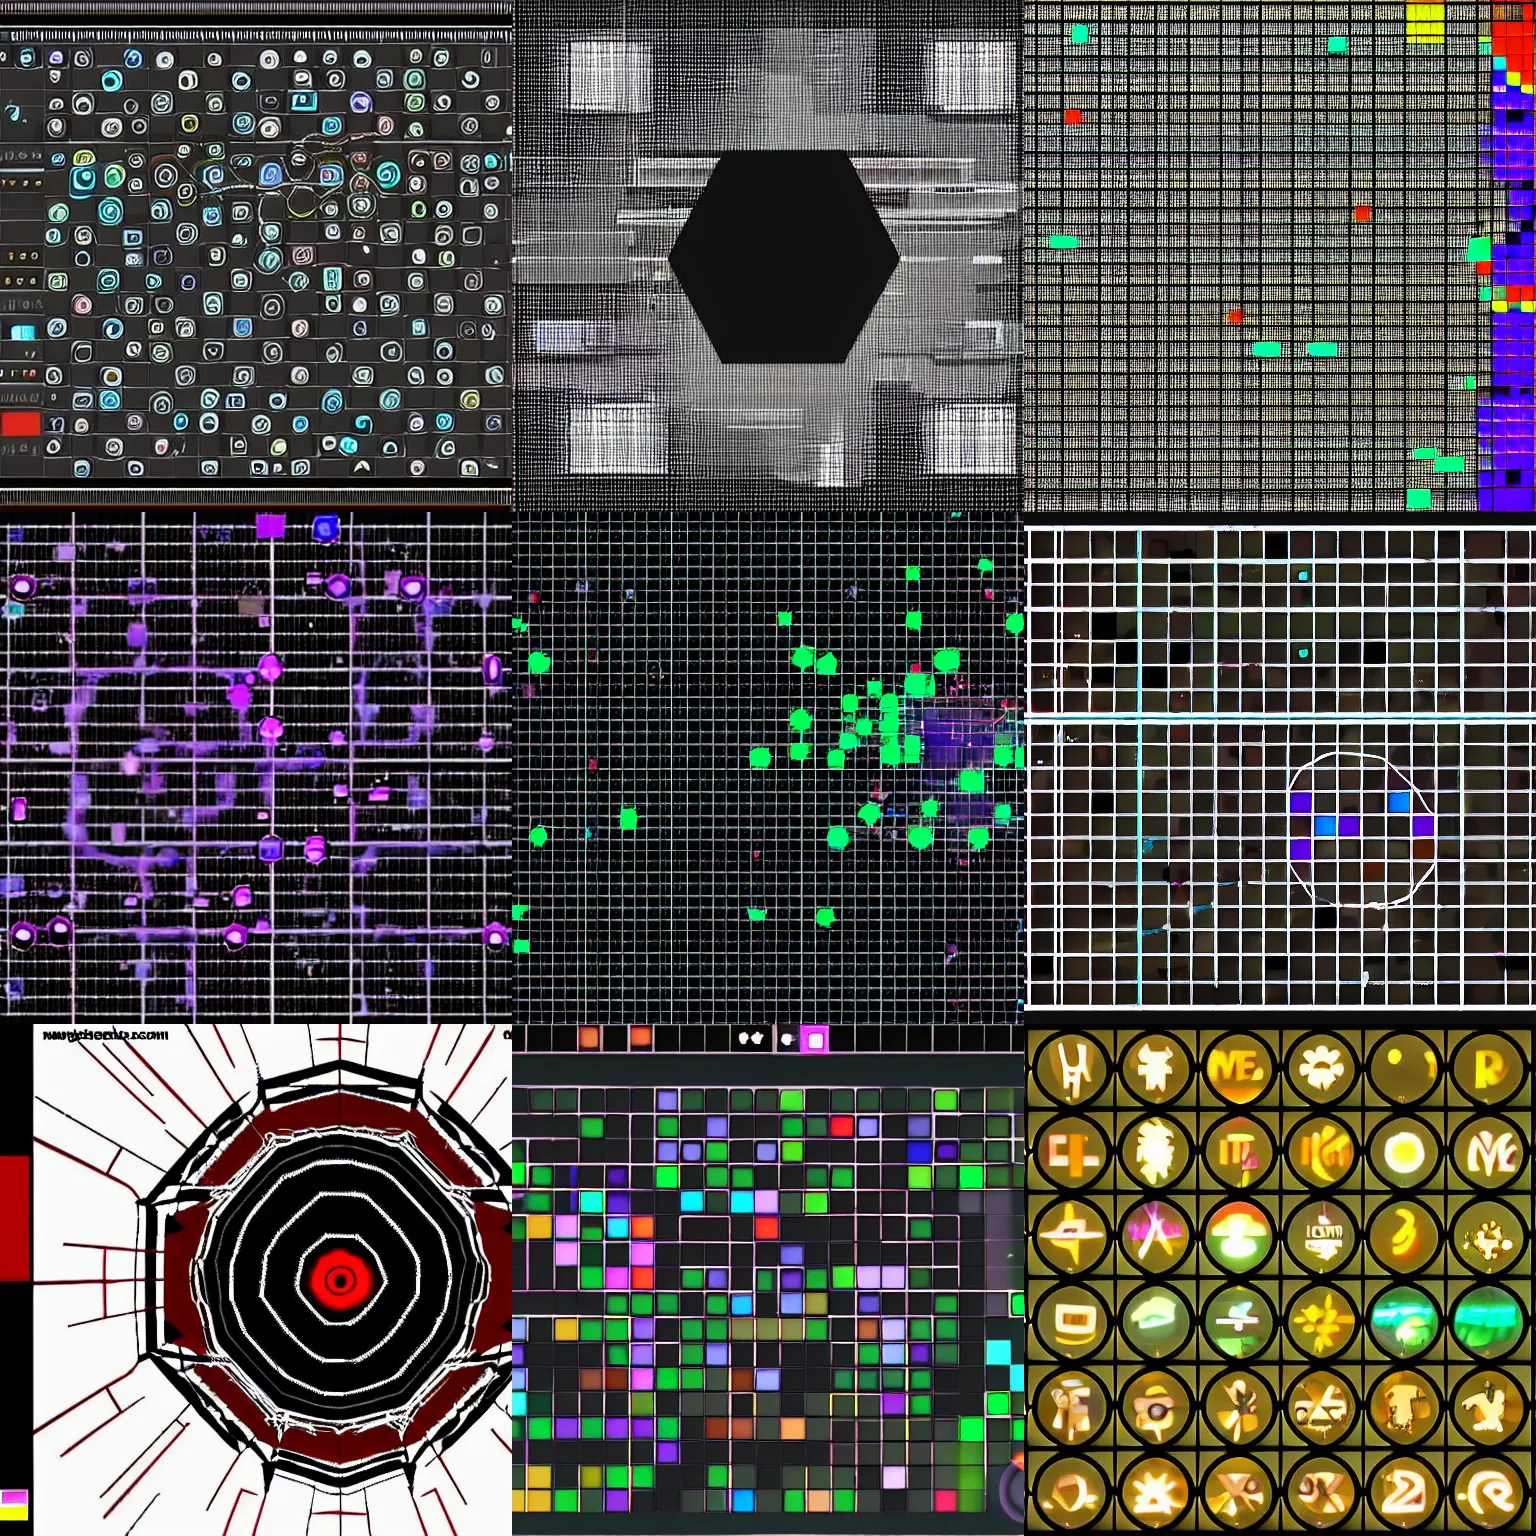 Prompt: osu! mapping, black background, geometric shapes, click the circles, osu.ppy.sh, youtube.com, reddit.com